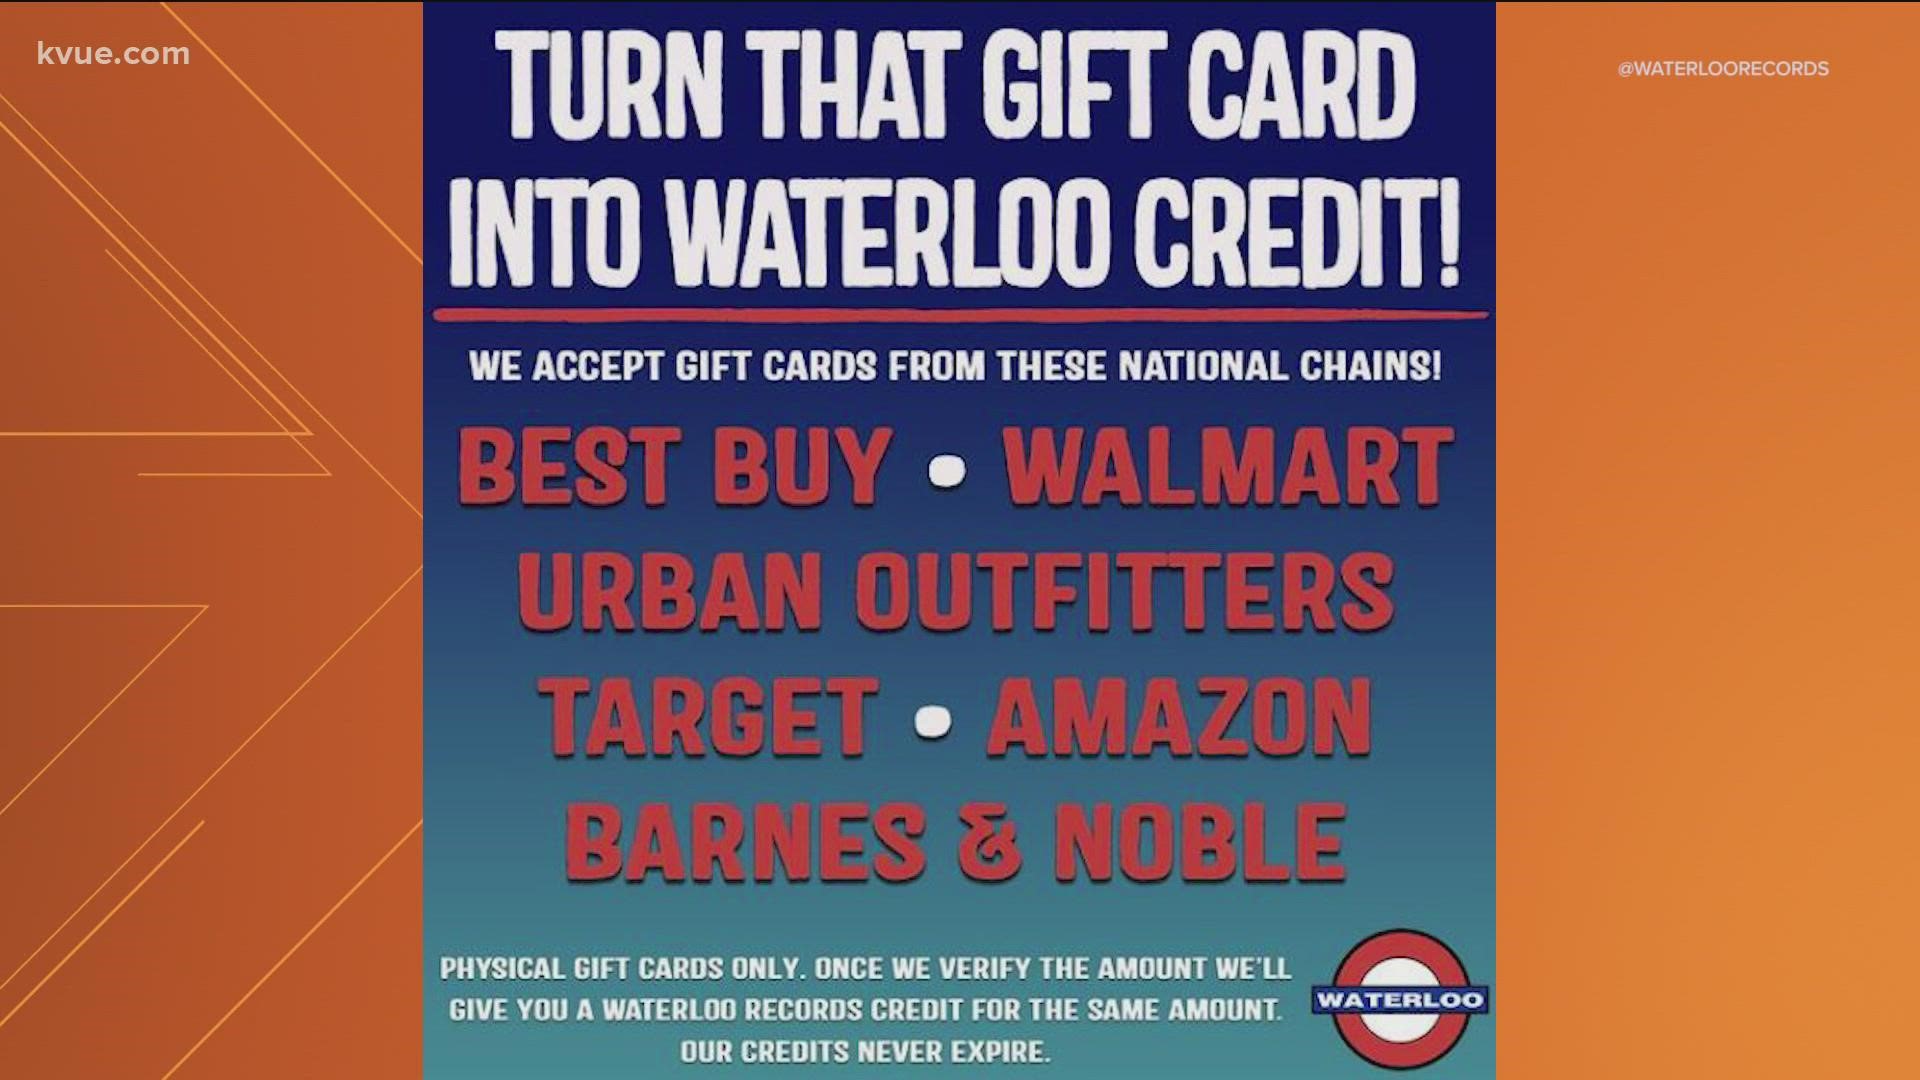 Waterloo Records is accepting gift cards to national retailers in exchange for store credit.